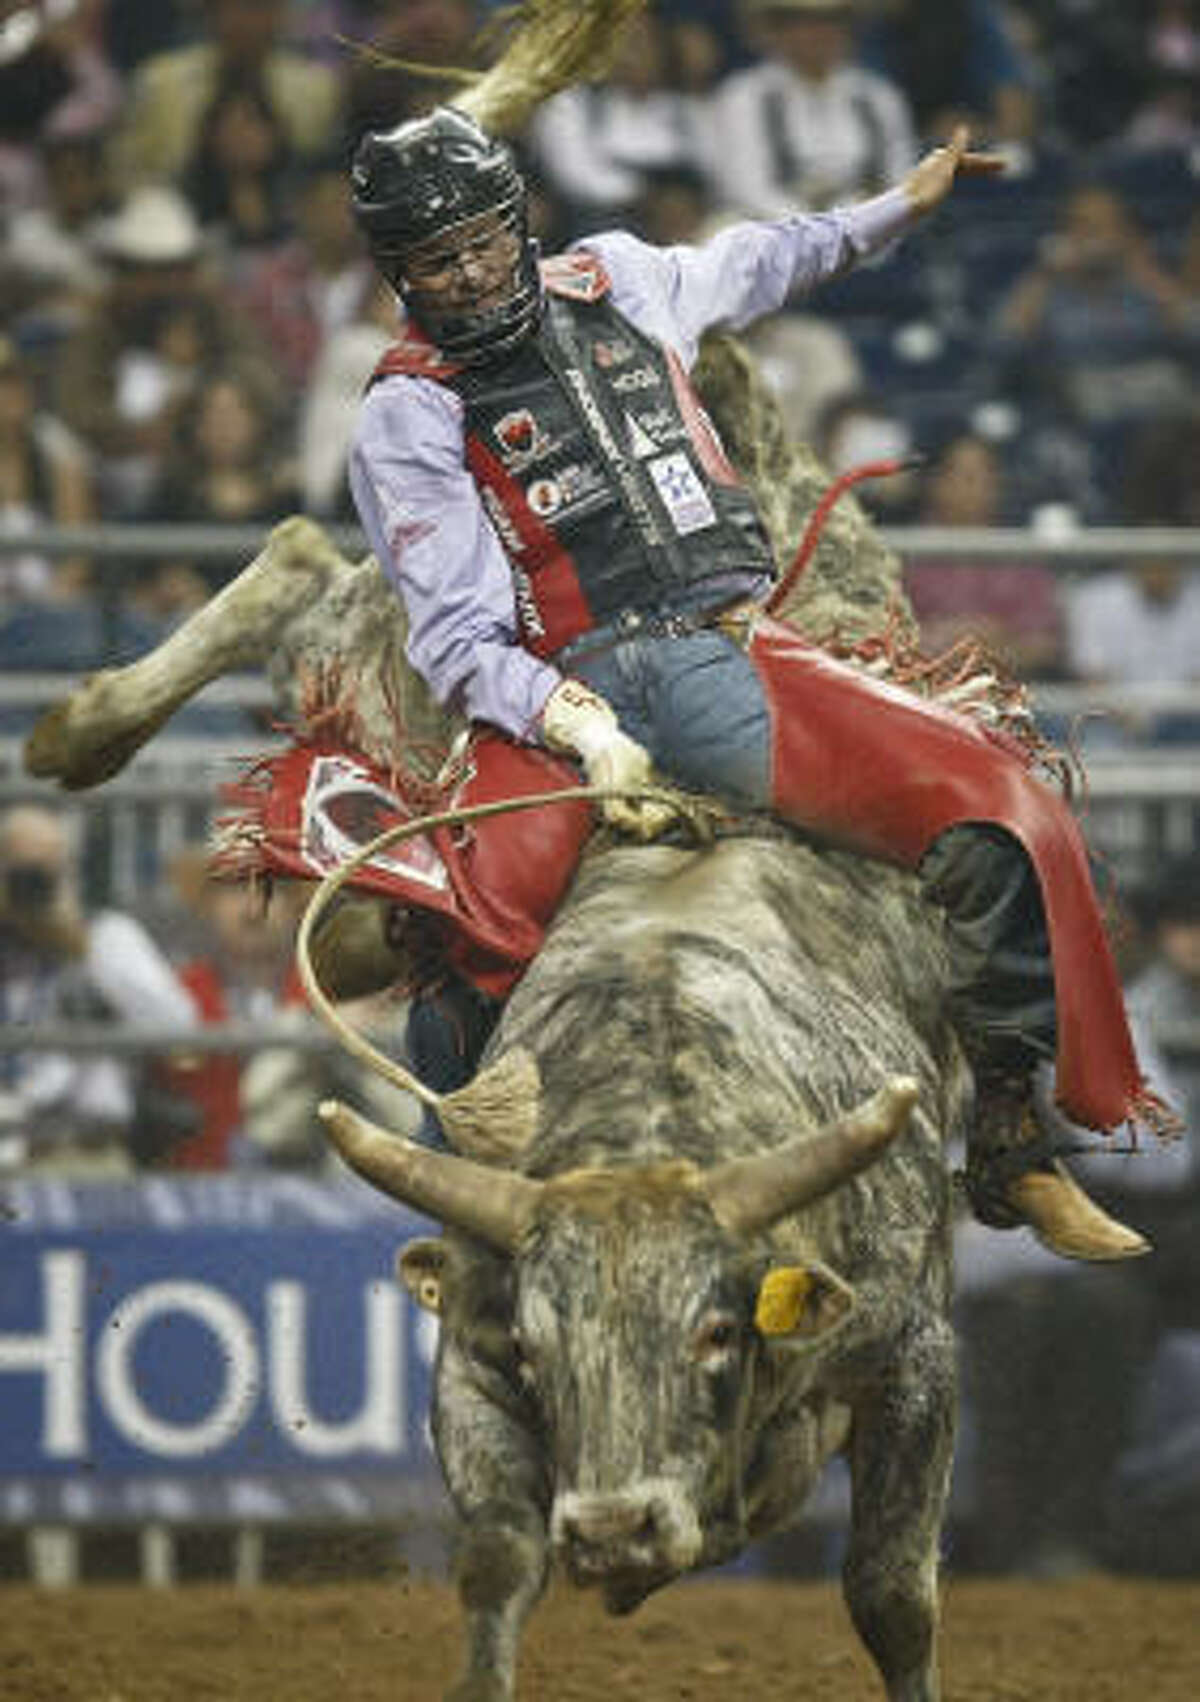 Bull rider Shawn Hogg is one of three returning winners who will be competing tonight in the third go-round of Super Series V at RodeoHouston.